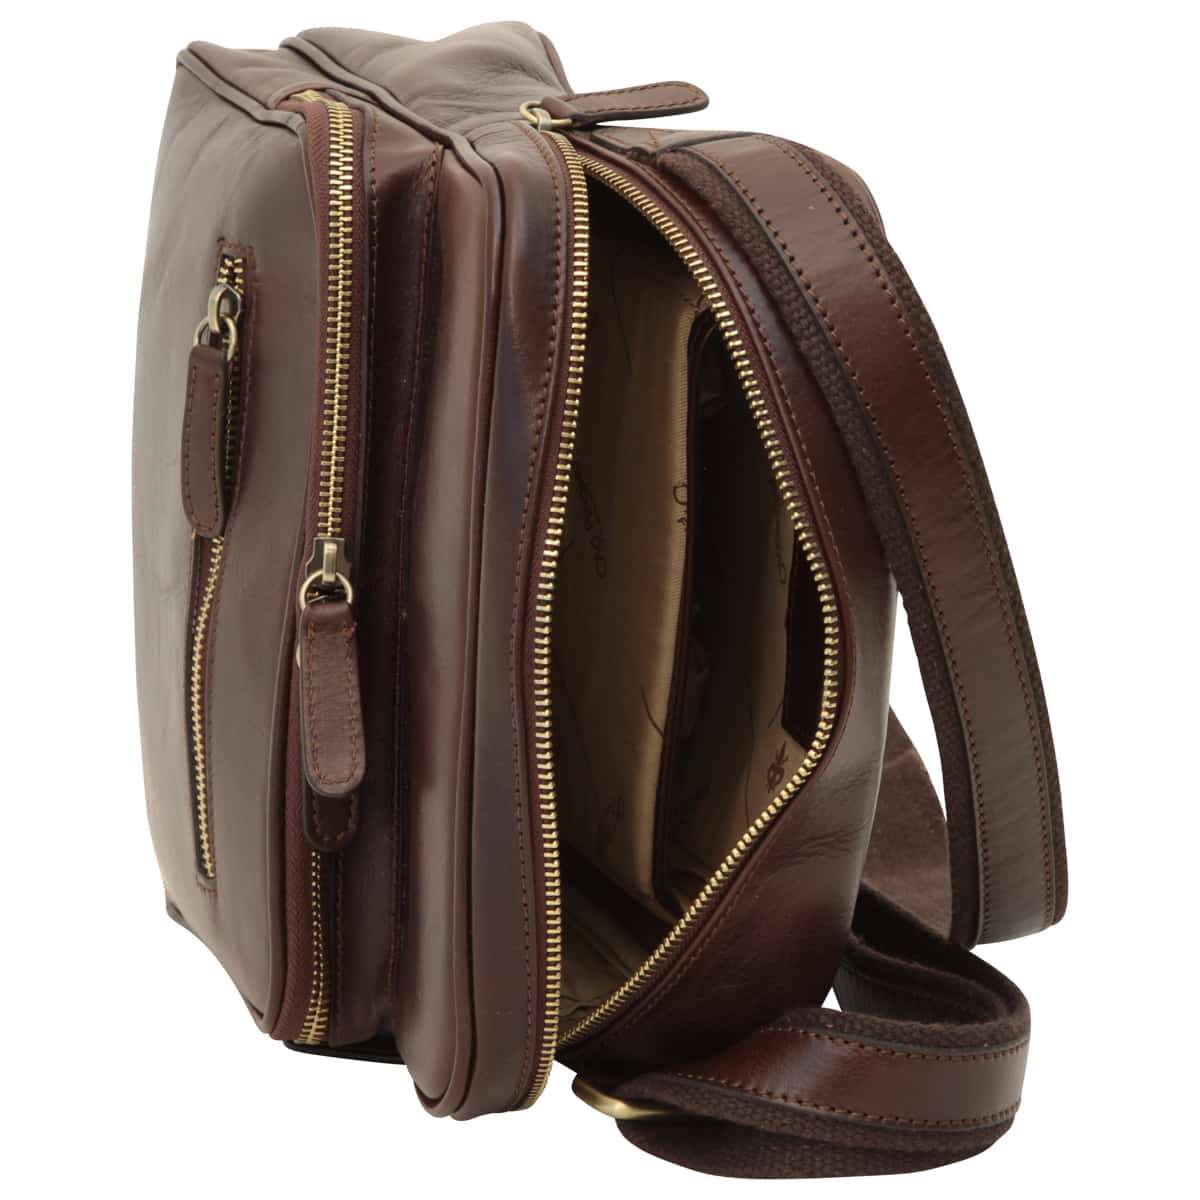 Small leather bag with zip closures - Dark Brown | 409389TM US | Old Angler Firenze